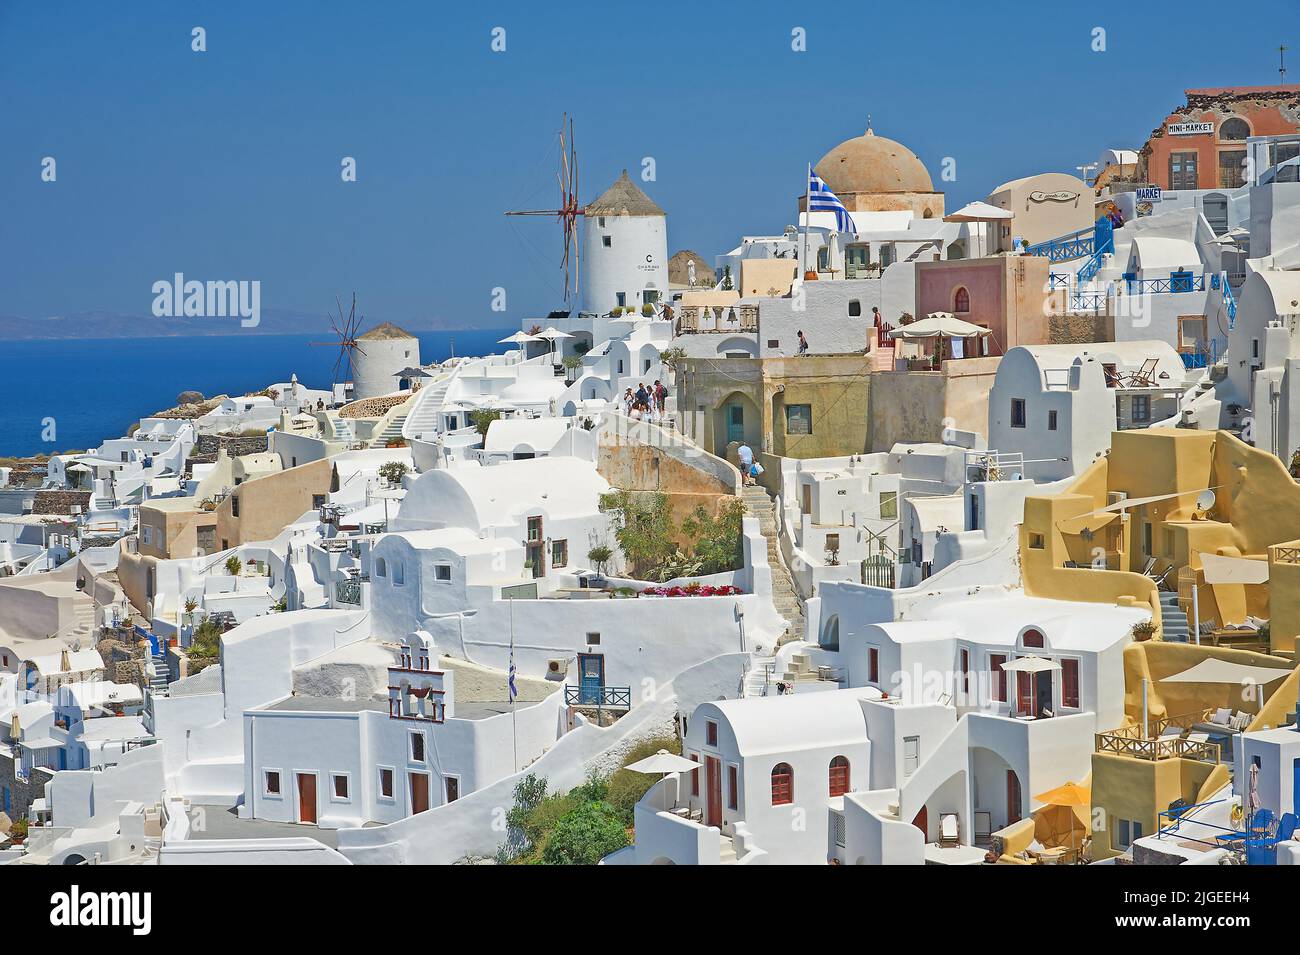 Oia, or Ia a picturesque village of white washed houses and traditional windmill on the island of Santorini, part of the Greek Cyclades Islands Stock Photo